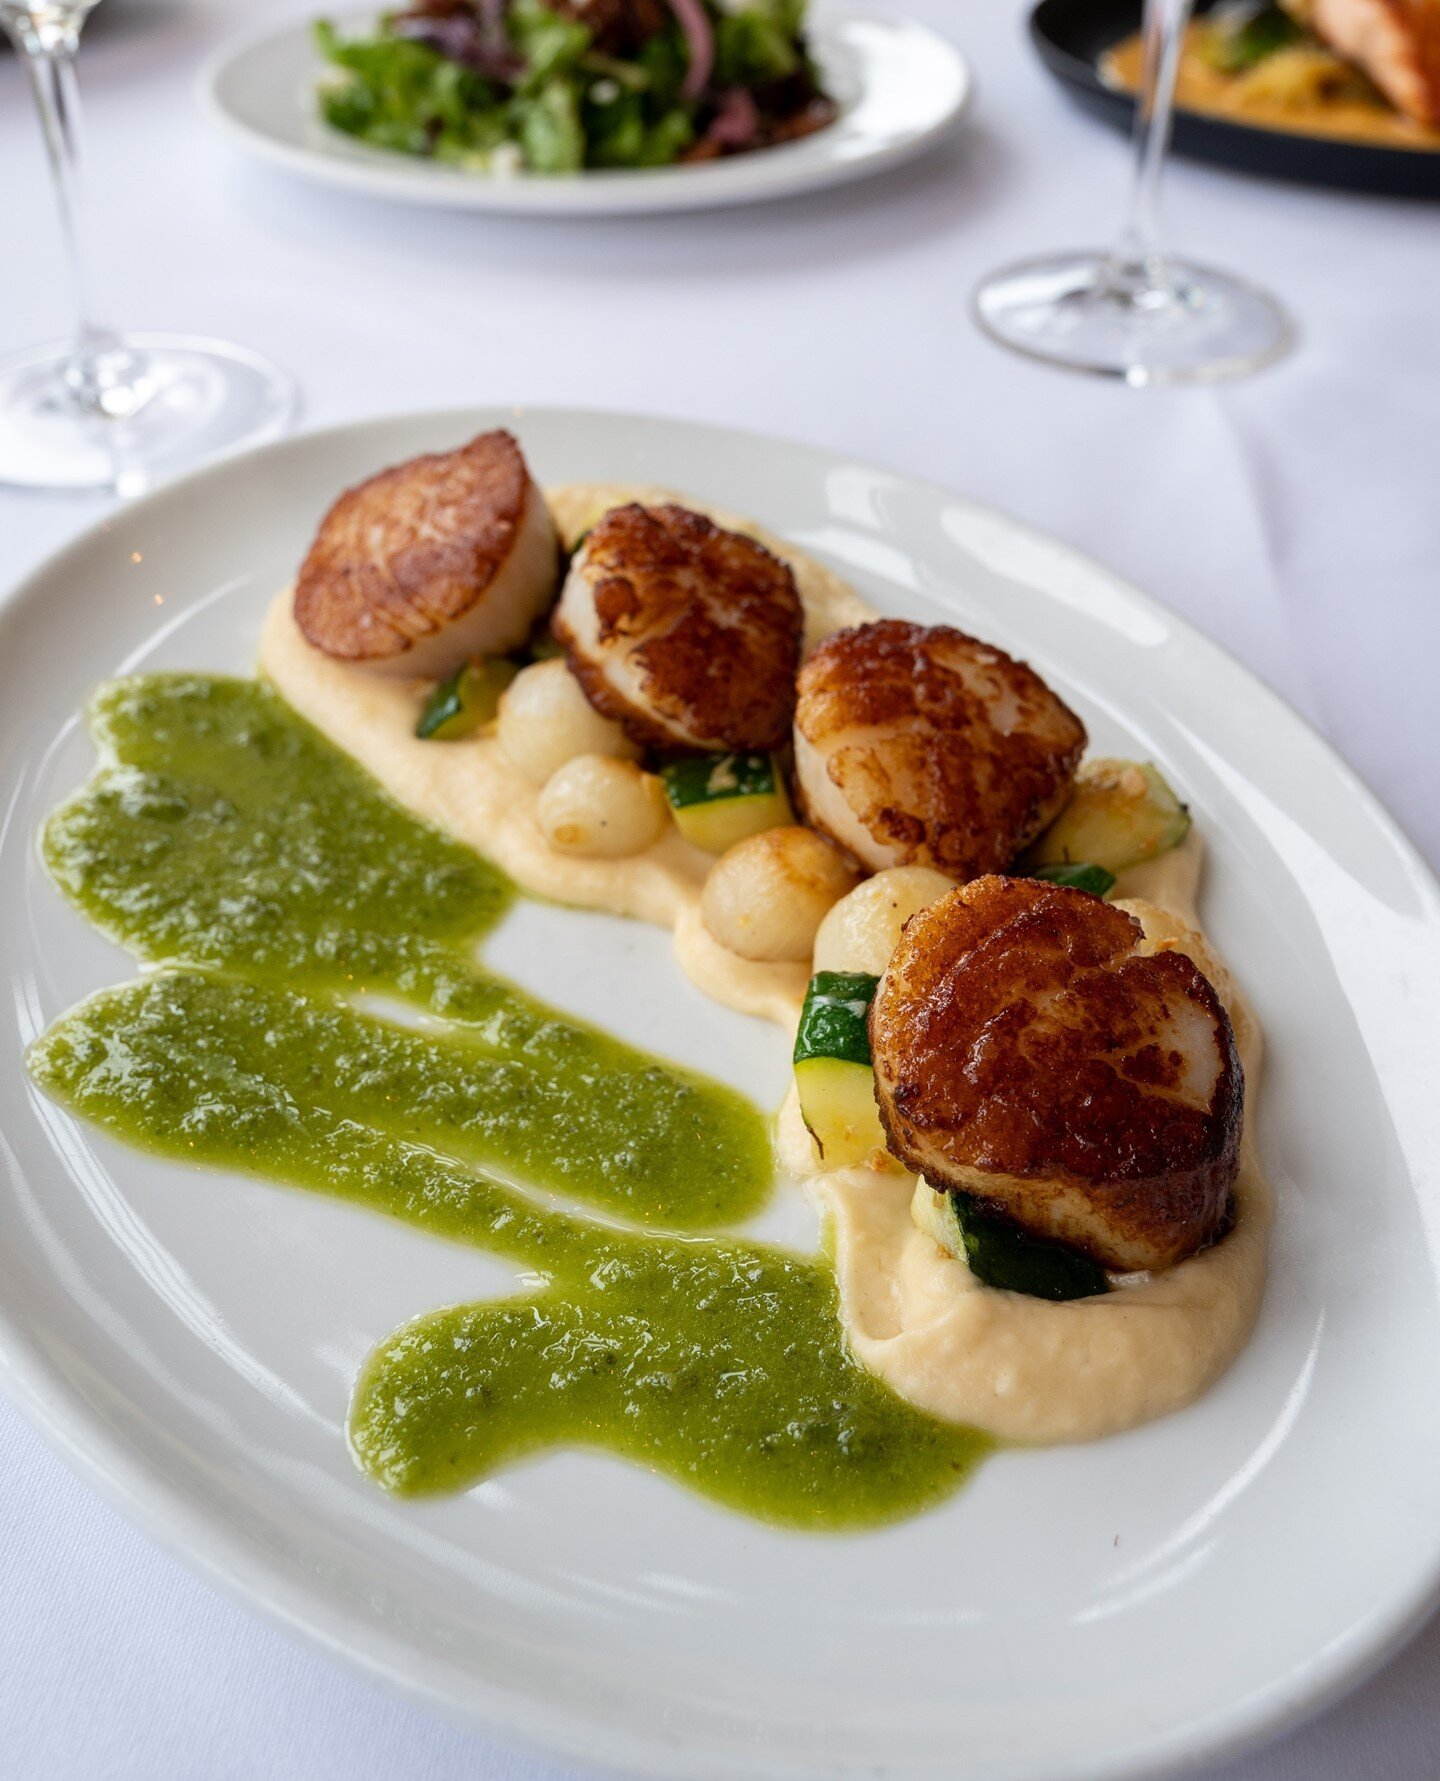 Do NOT miss out on @dwntowncle Restaurant Week!⁠
⁠⁠
Tonight we recommend the Scallops.⁠
⁠
*Available for dine in or take out.⁠
⁠
#seafood #seafoodporn #seafoodlover #seafoodlove #seafoodlovers #seafoodtime #freshseafood #seafoodresturant #seafoodie #